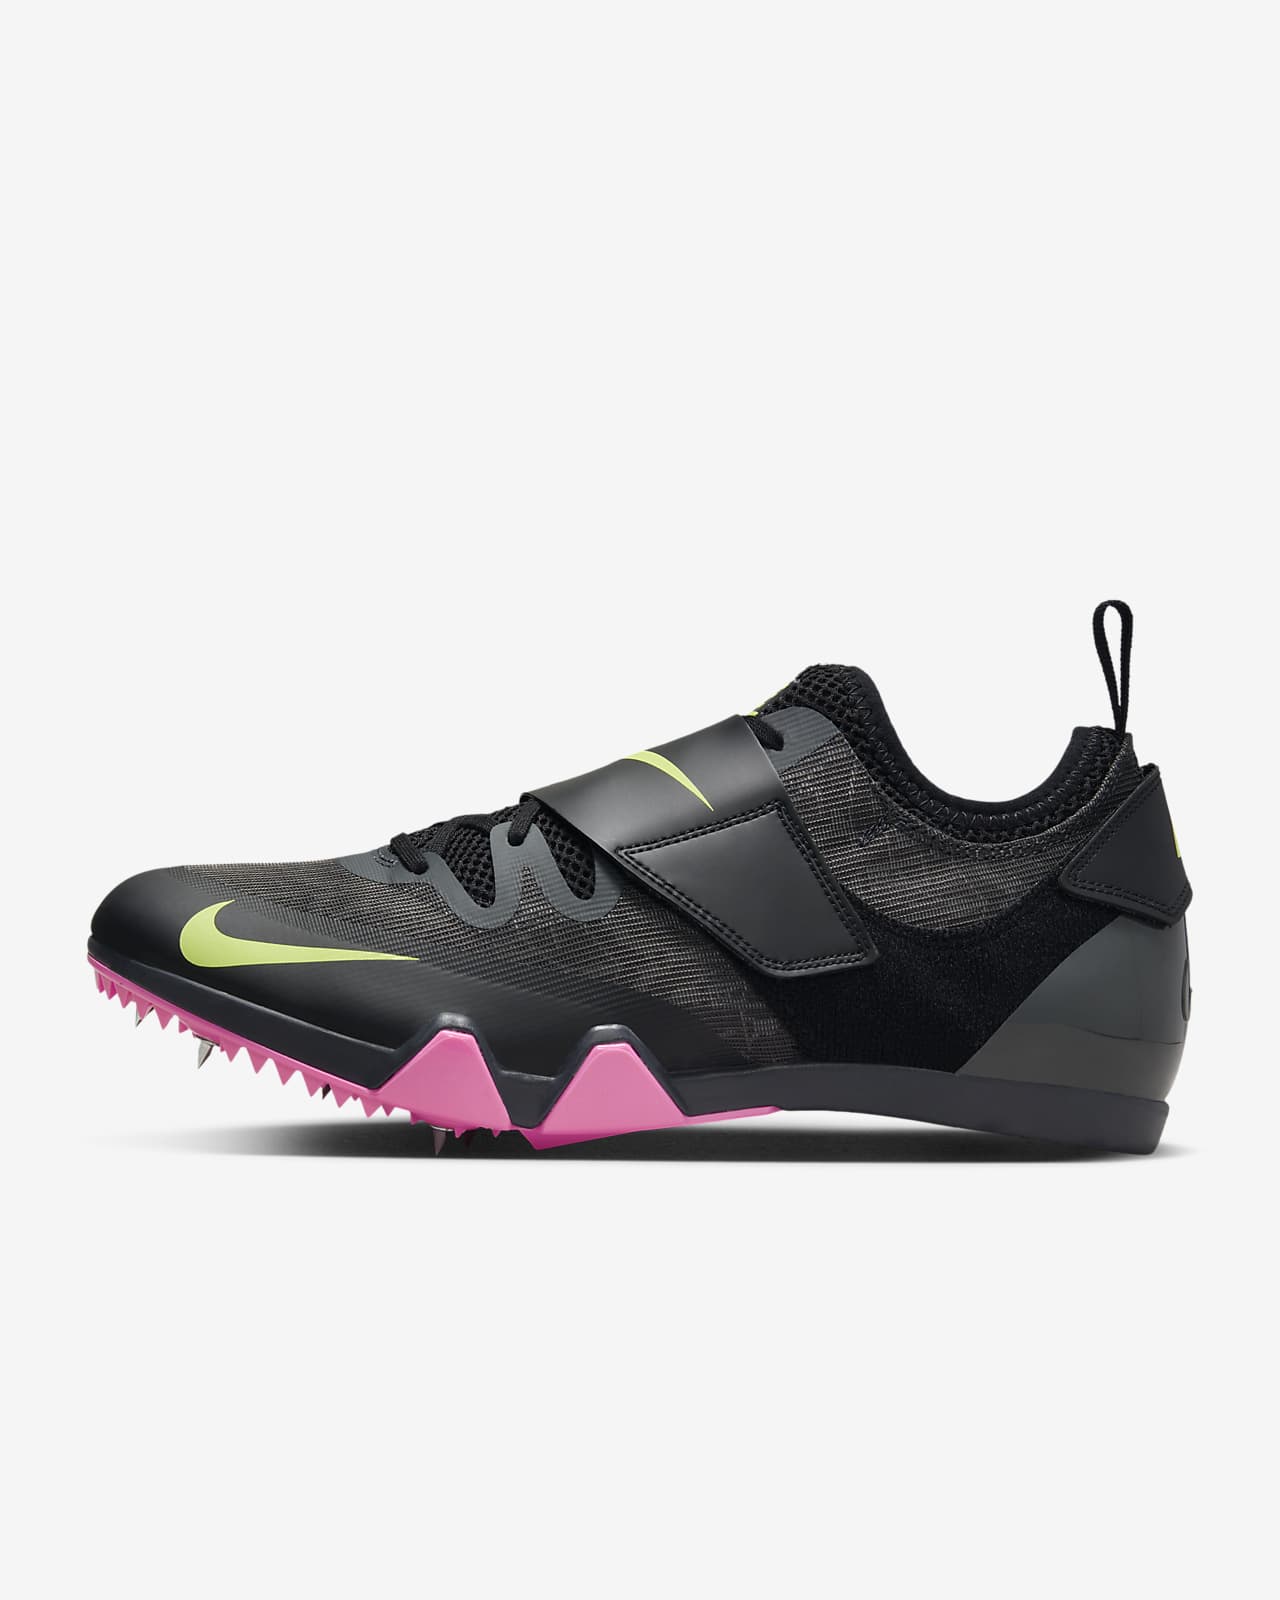 Nike Pole Vault Elite Track and field jumping spikes